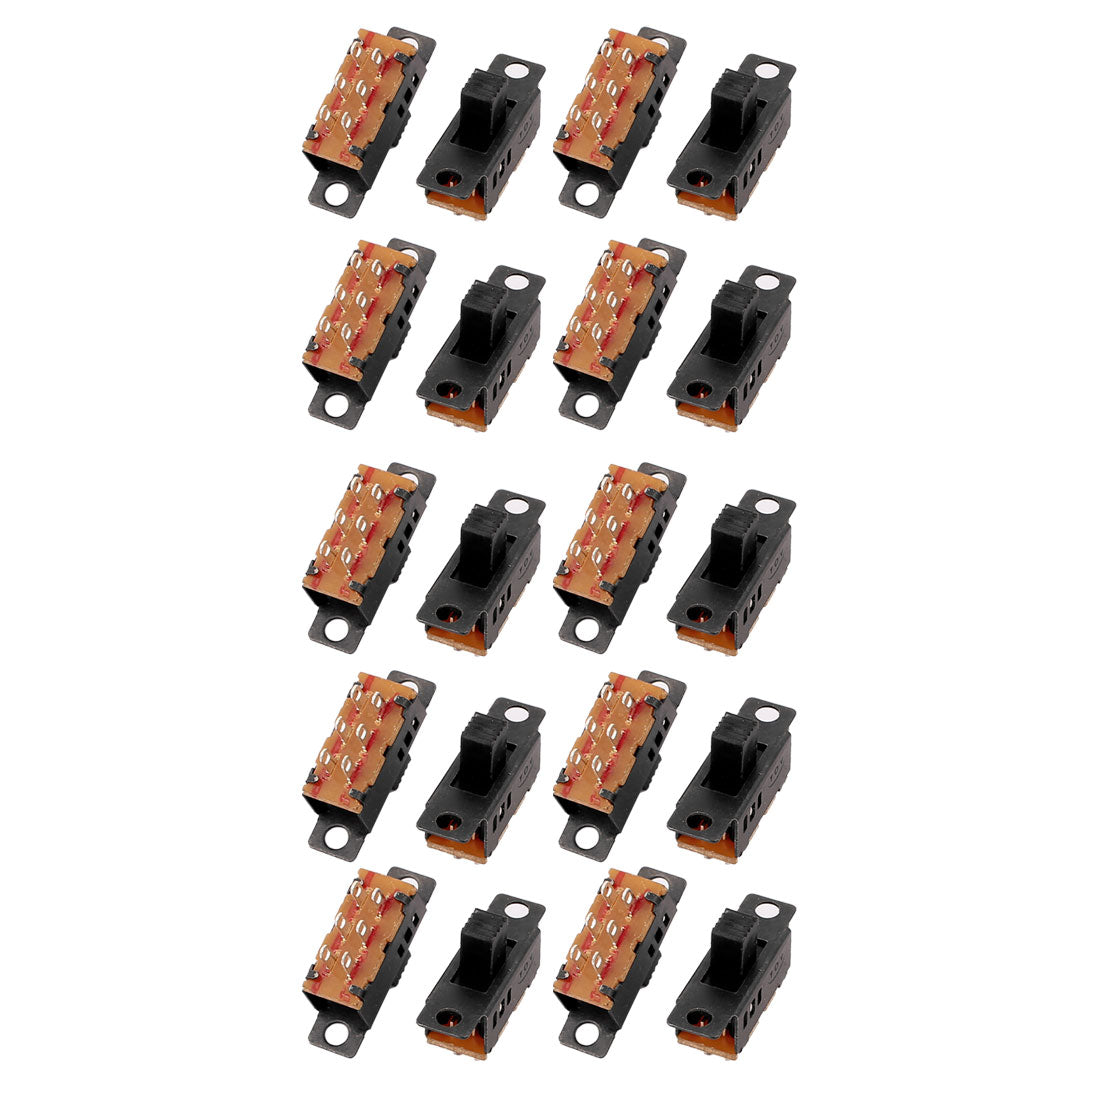 uxcell Uxcell 20Pcs 3 Position 6P 2P3T Micro Miniature PCB Slide Switch Latching Toggle Switch